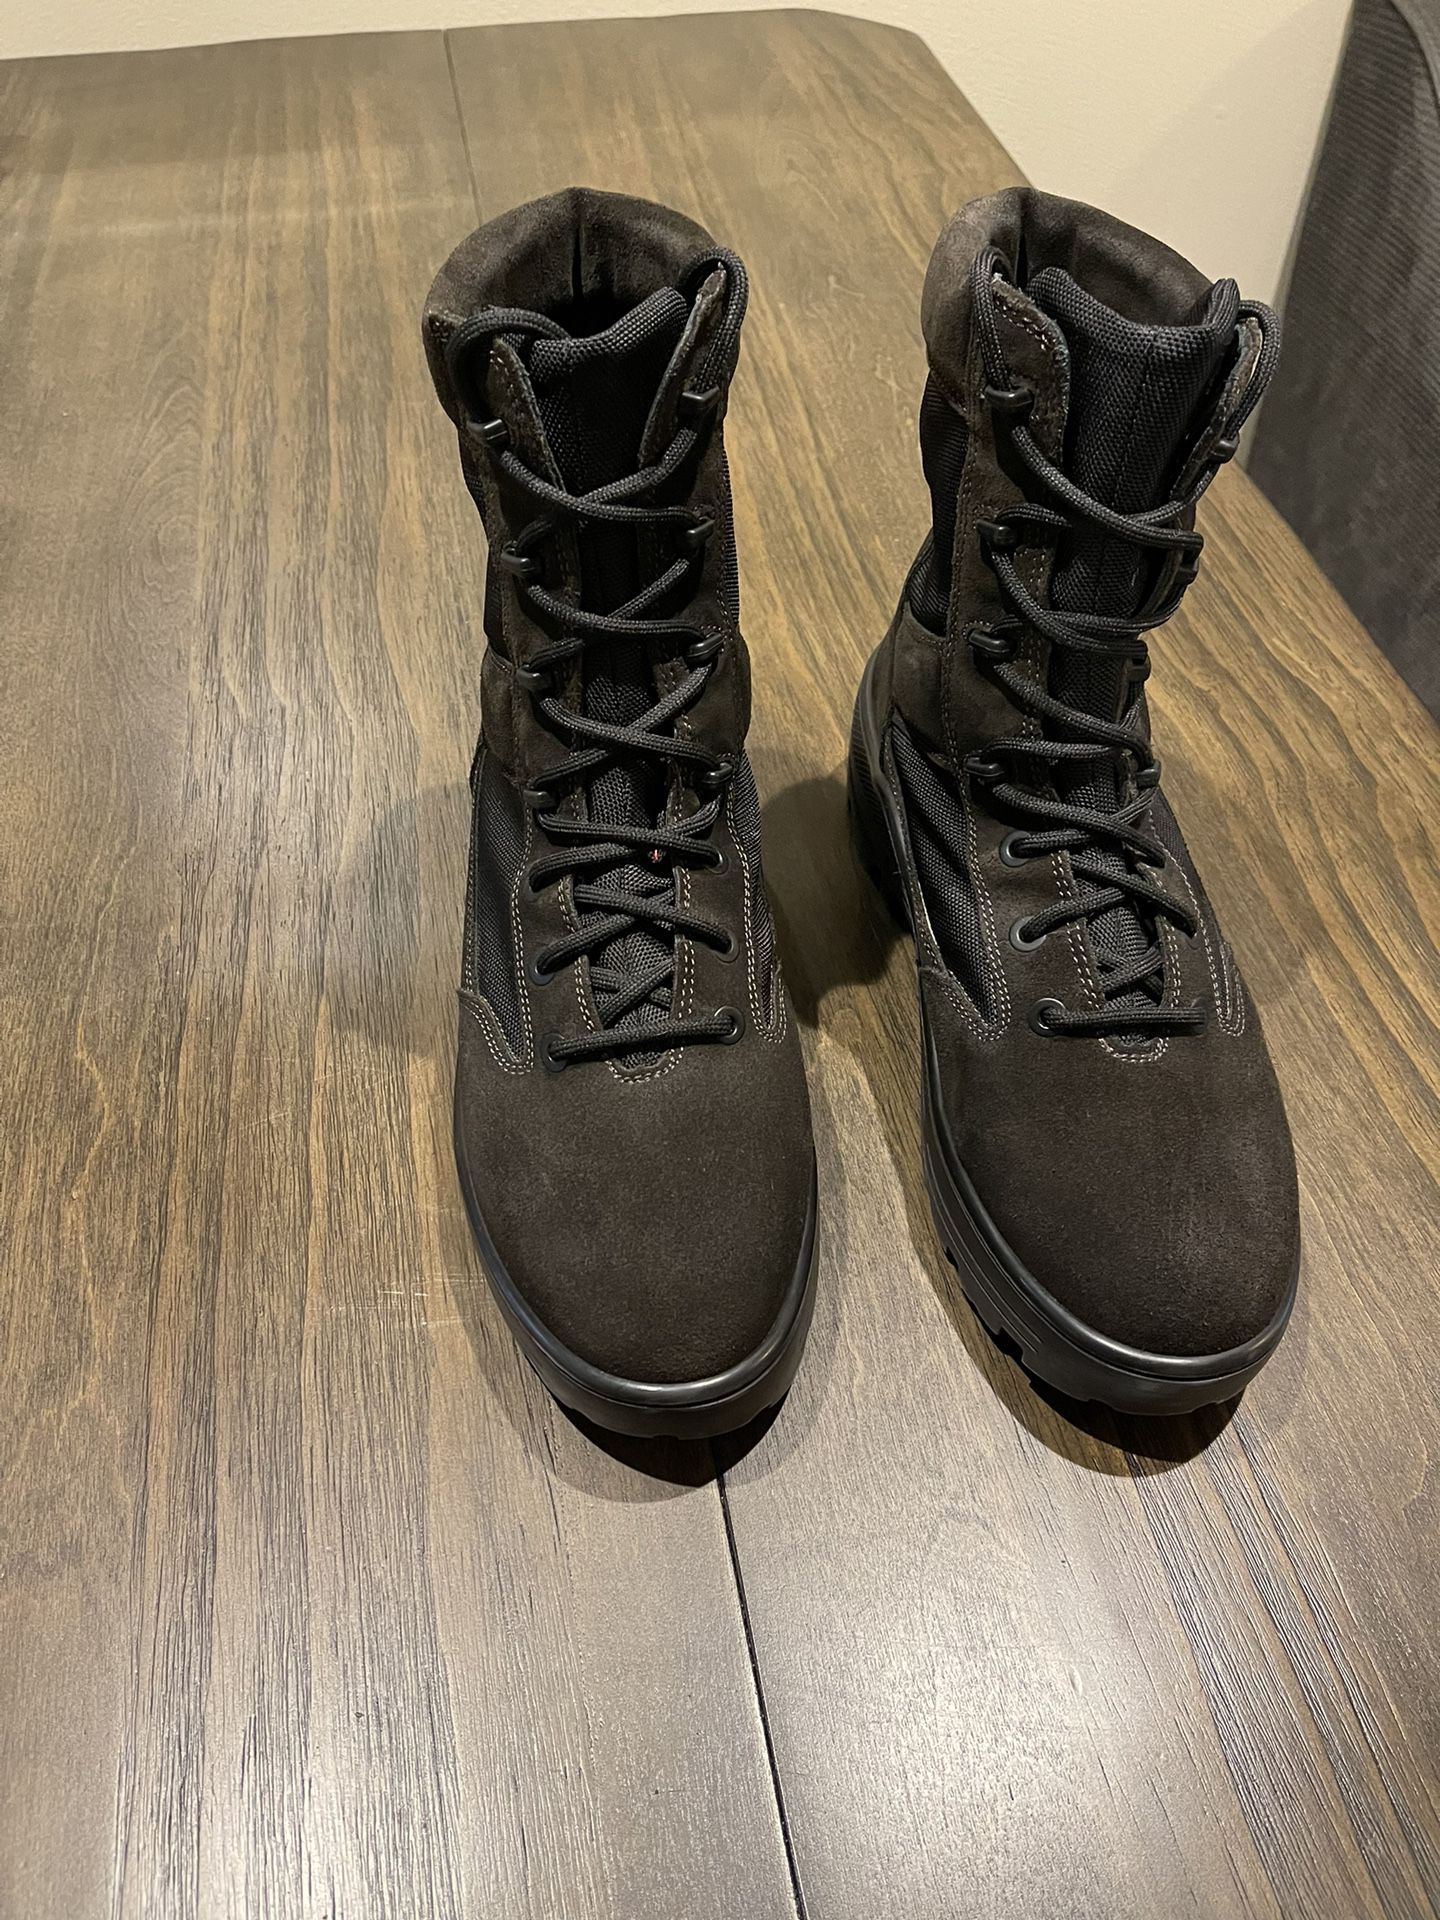 YEEZY SEASON 4 COMBAT BOOTS SIZE 46 $800 OBO for Sale in Rancho Cucamonga,  CA - OfferUp